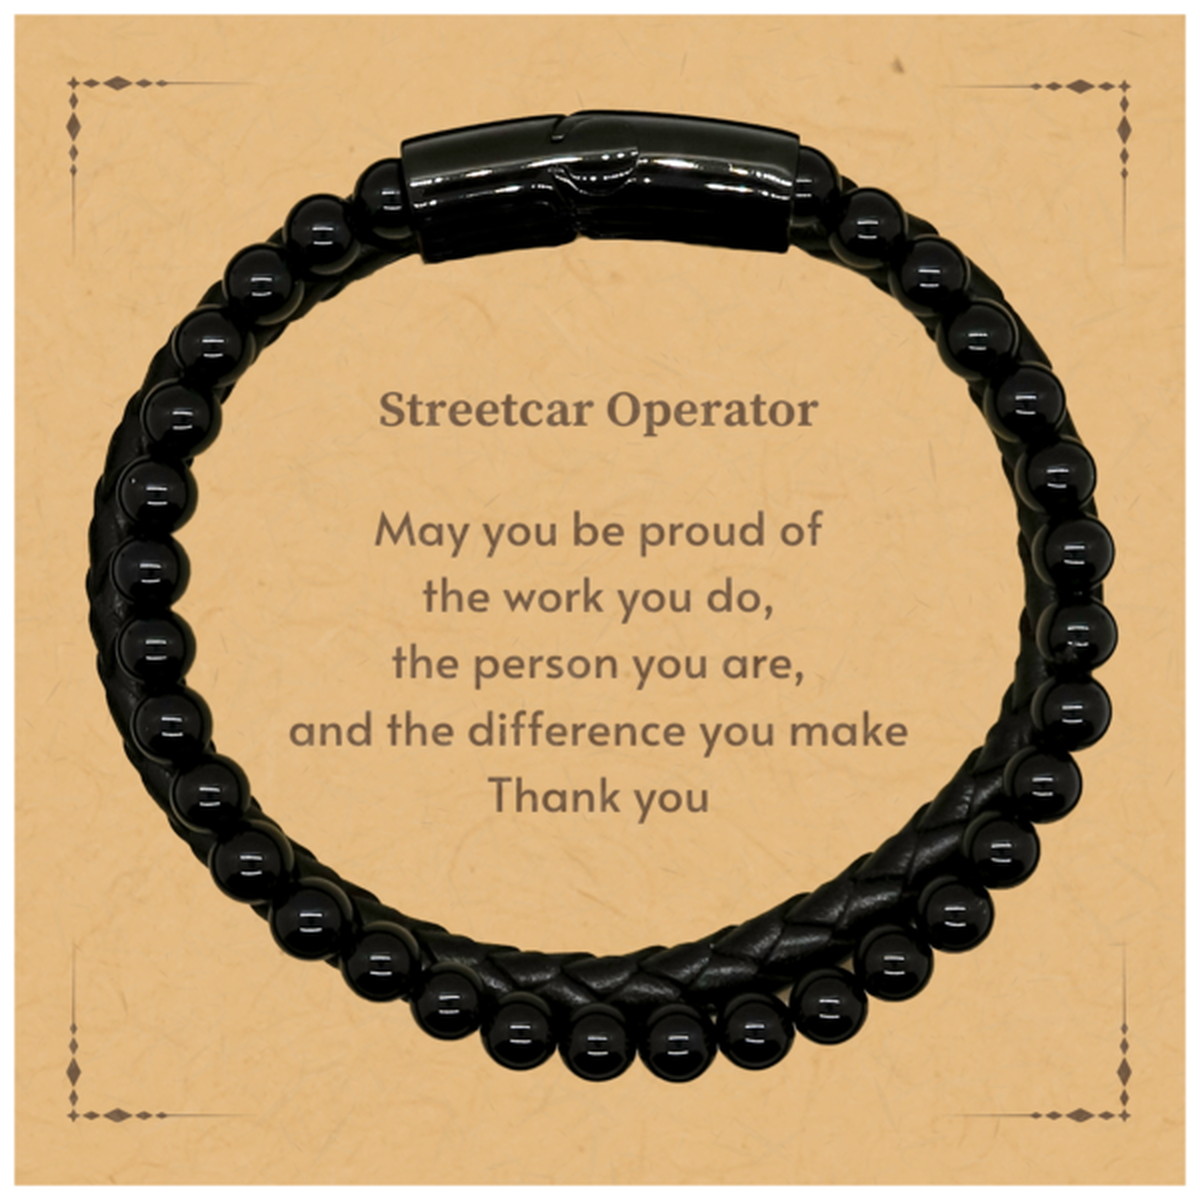 Heartwarming Stone Leather Bracelets Retirement Coworkers Gifts for Streetcar Operator, Streetcar Operator May You be proud of the work you do, the person you are Gifts for Boss Men Women Friends